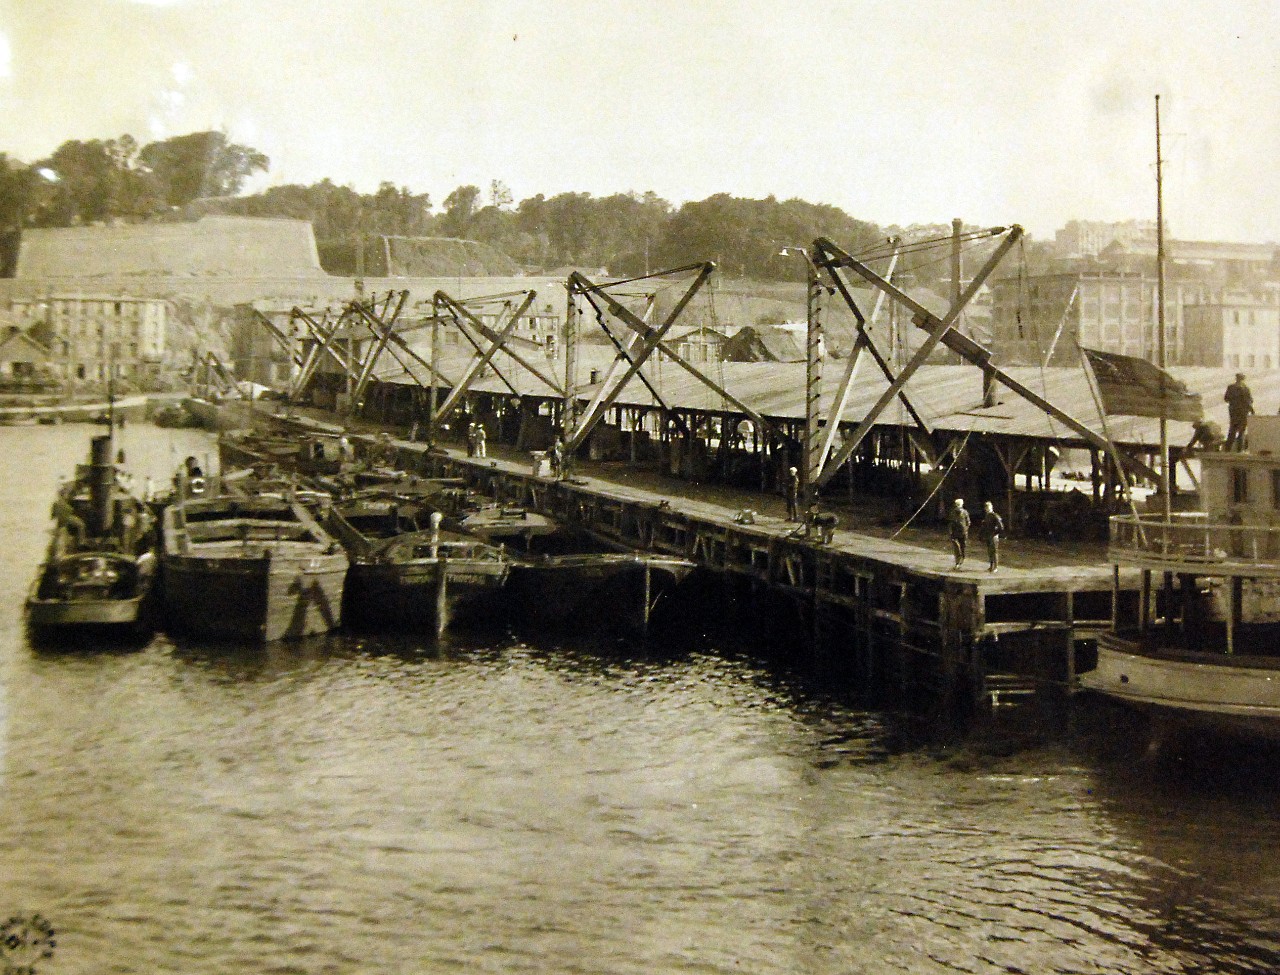 <p>Lot-8308-1: American Expeditionary Forces, WWI. Pier No.3, Port De Commerce, Brest, France. Because of the lack of adequate piers at Brest, it has been necessary to unload most of the troops and cargoes by lighters, although that harbor has practically unlimited water and can accommodate the biggest ships, July 12, 1918. U.S. Army Signal Corps Photograph. Courtesy of the Library of Congress. (2016/11/18).</p>
